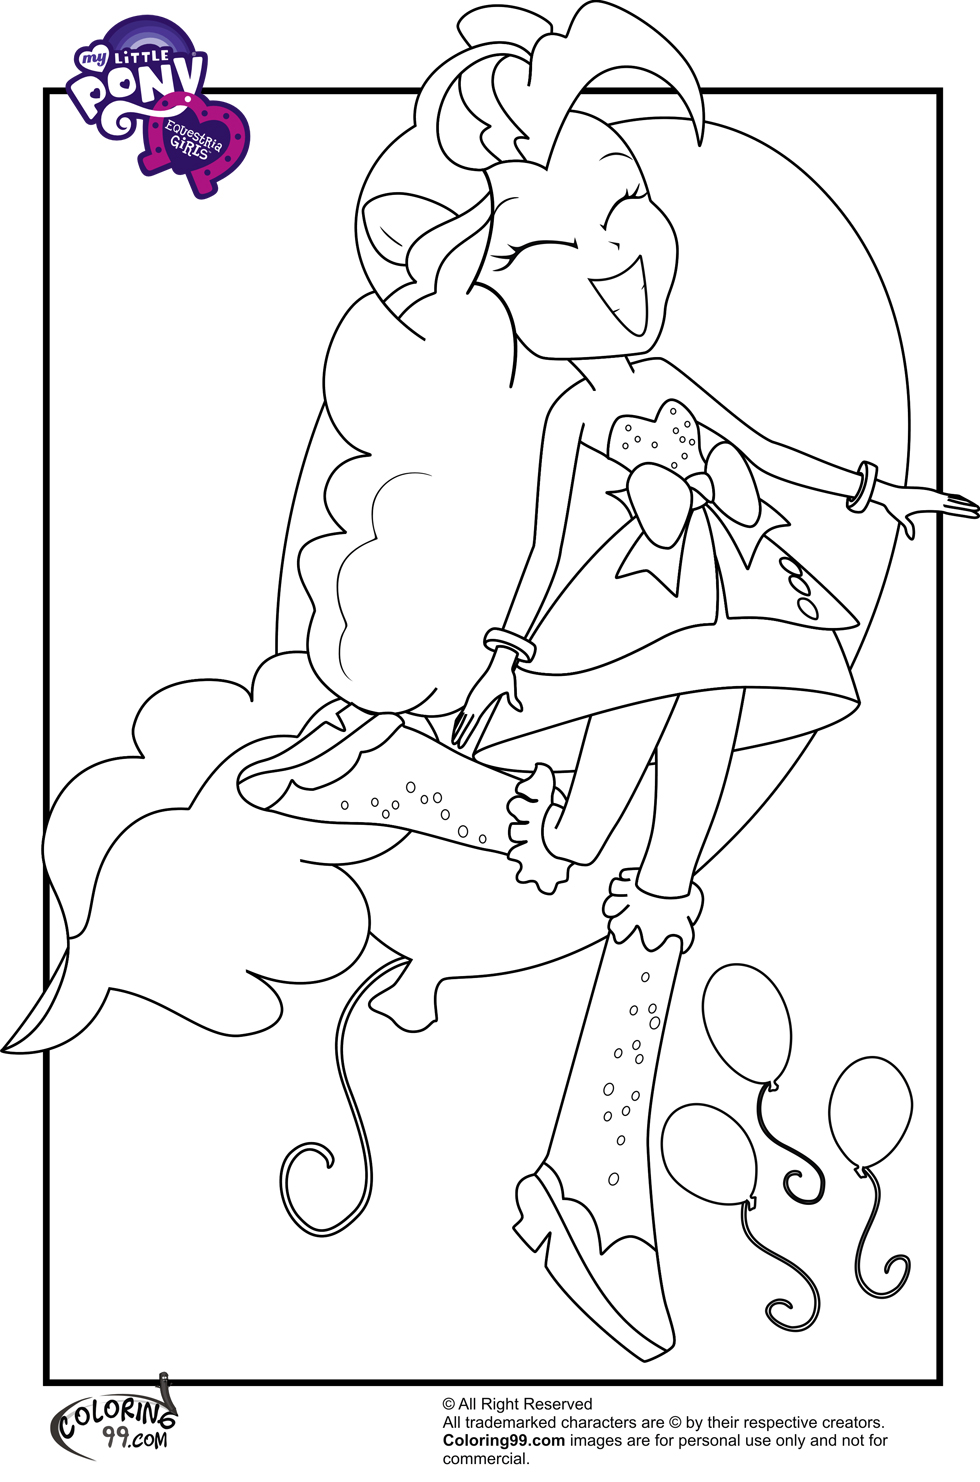 My Little Pony Equestria Girls Coloring Pages | Team colors